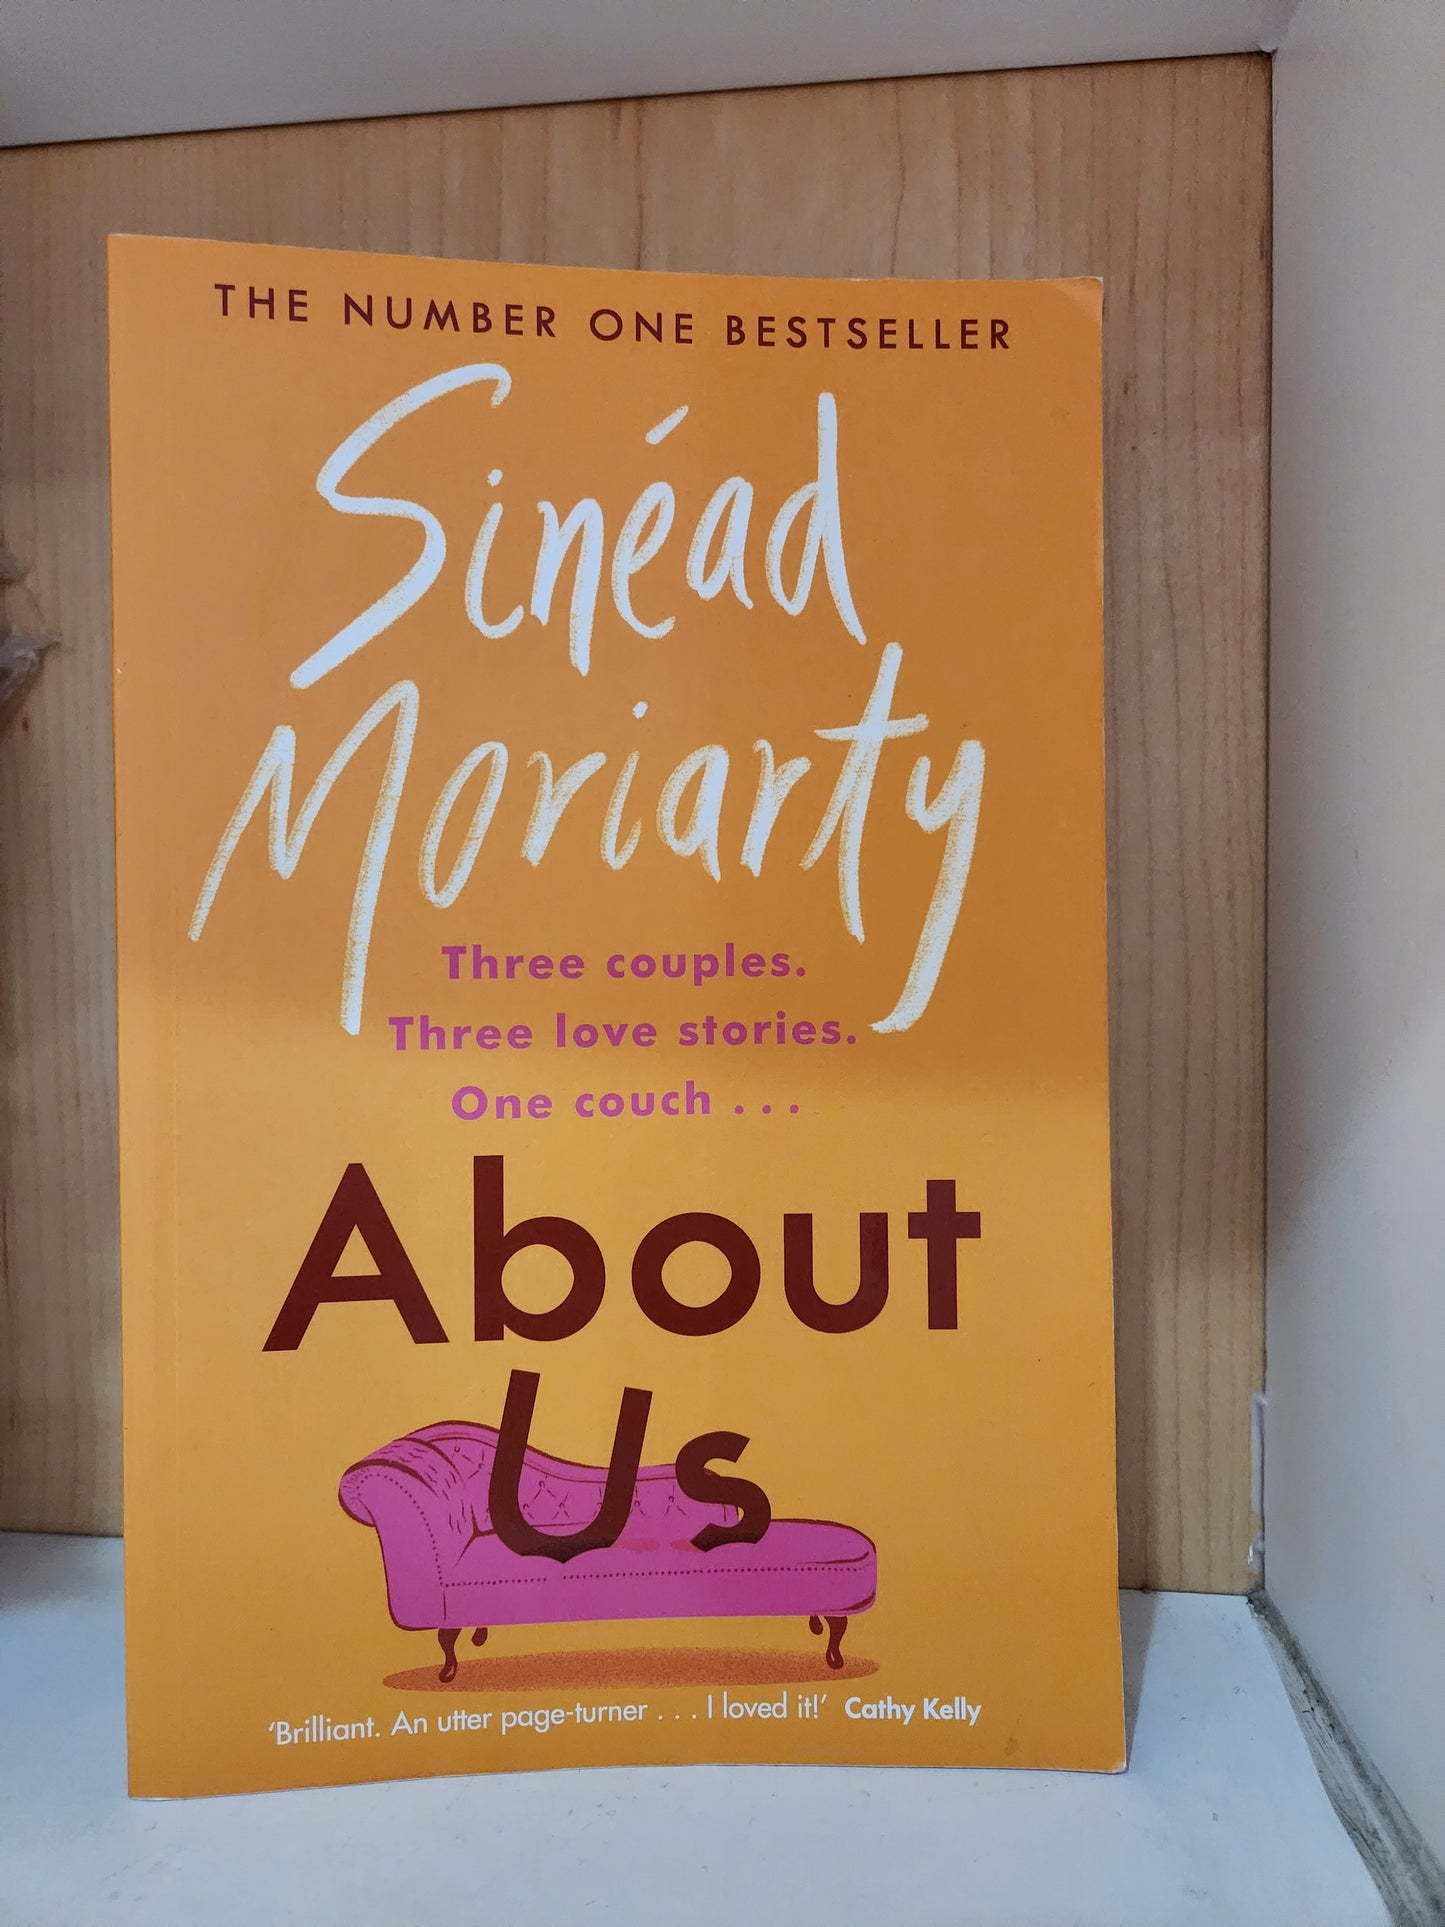 About Us by Sinead Moriarty [ Preloved]